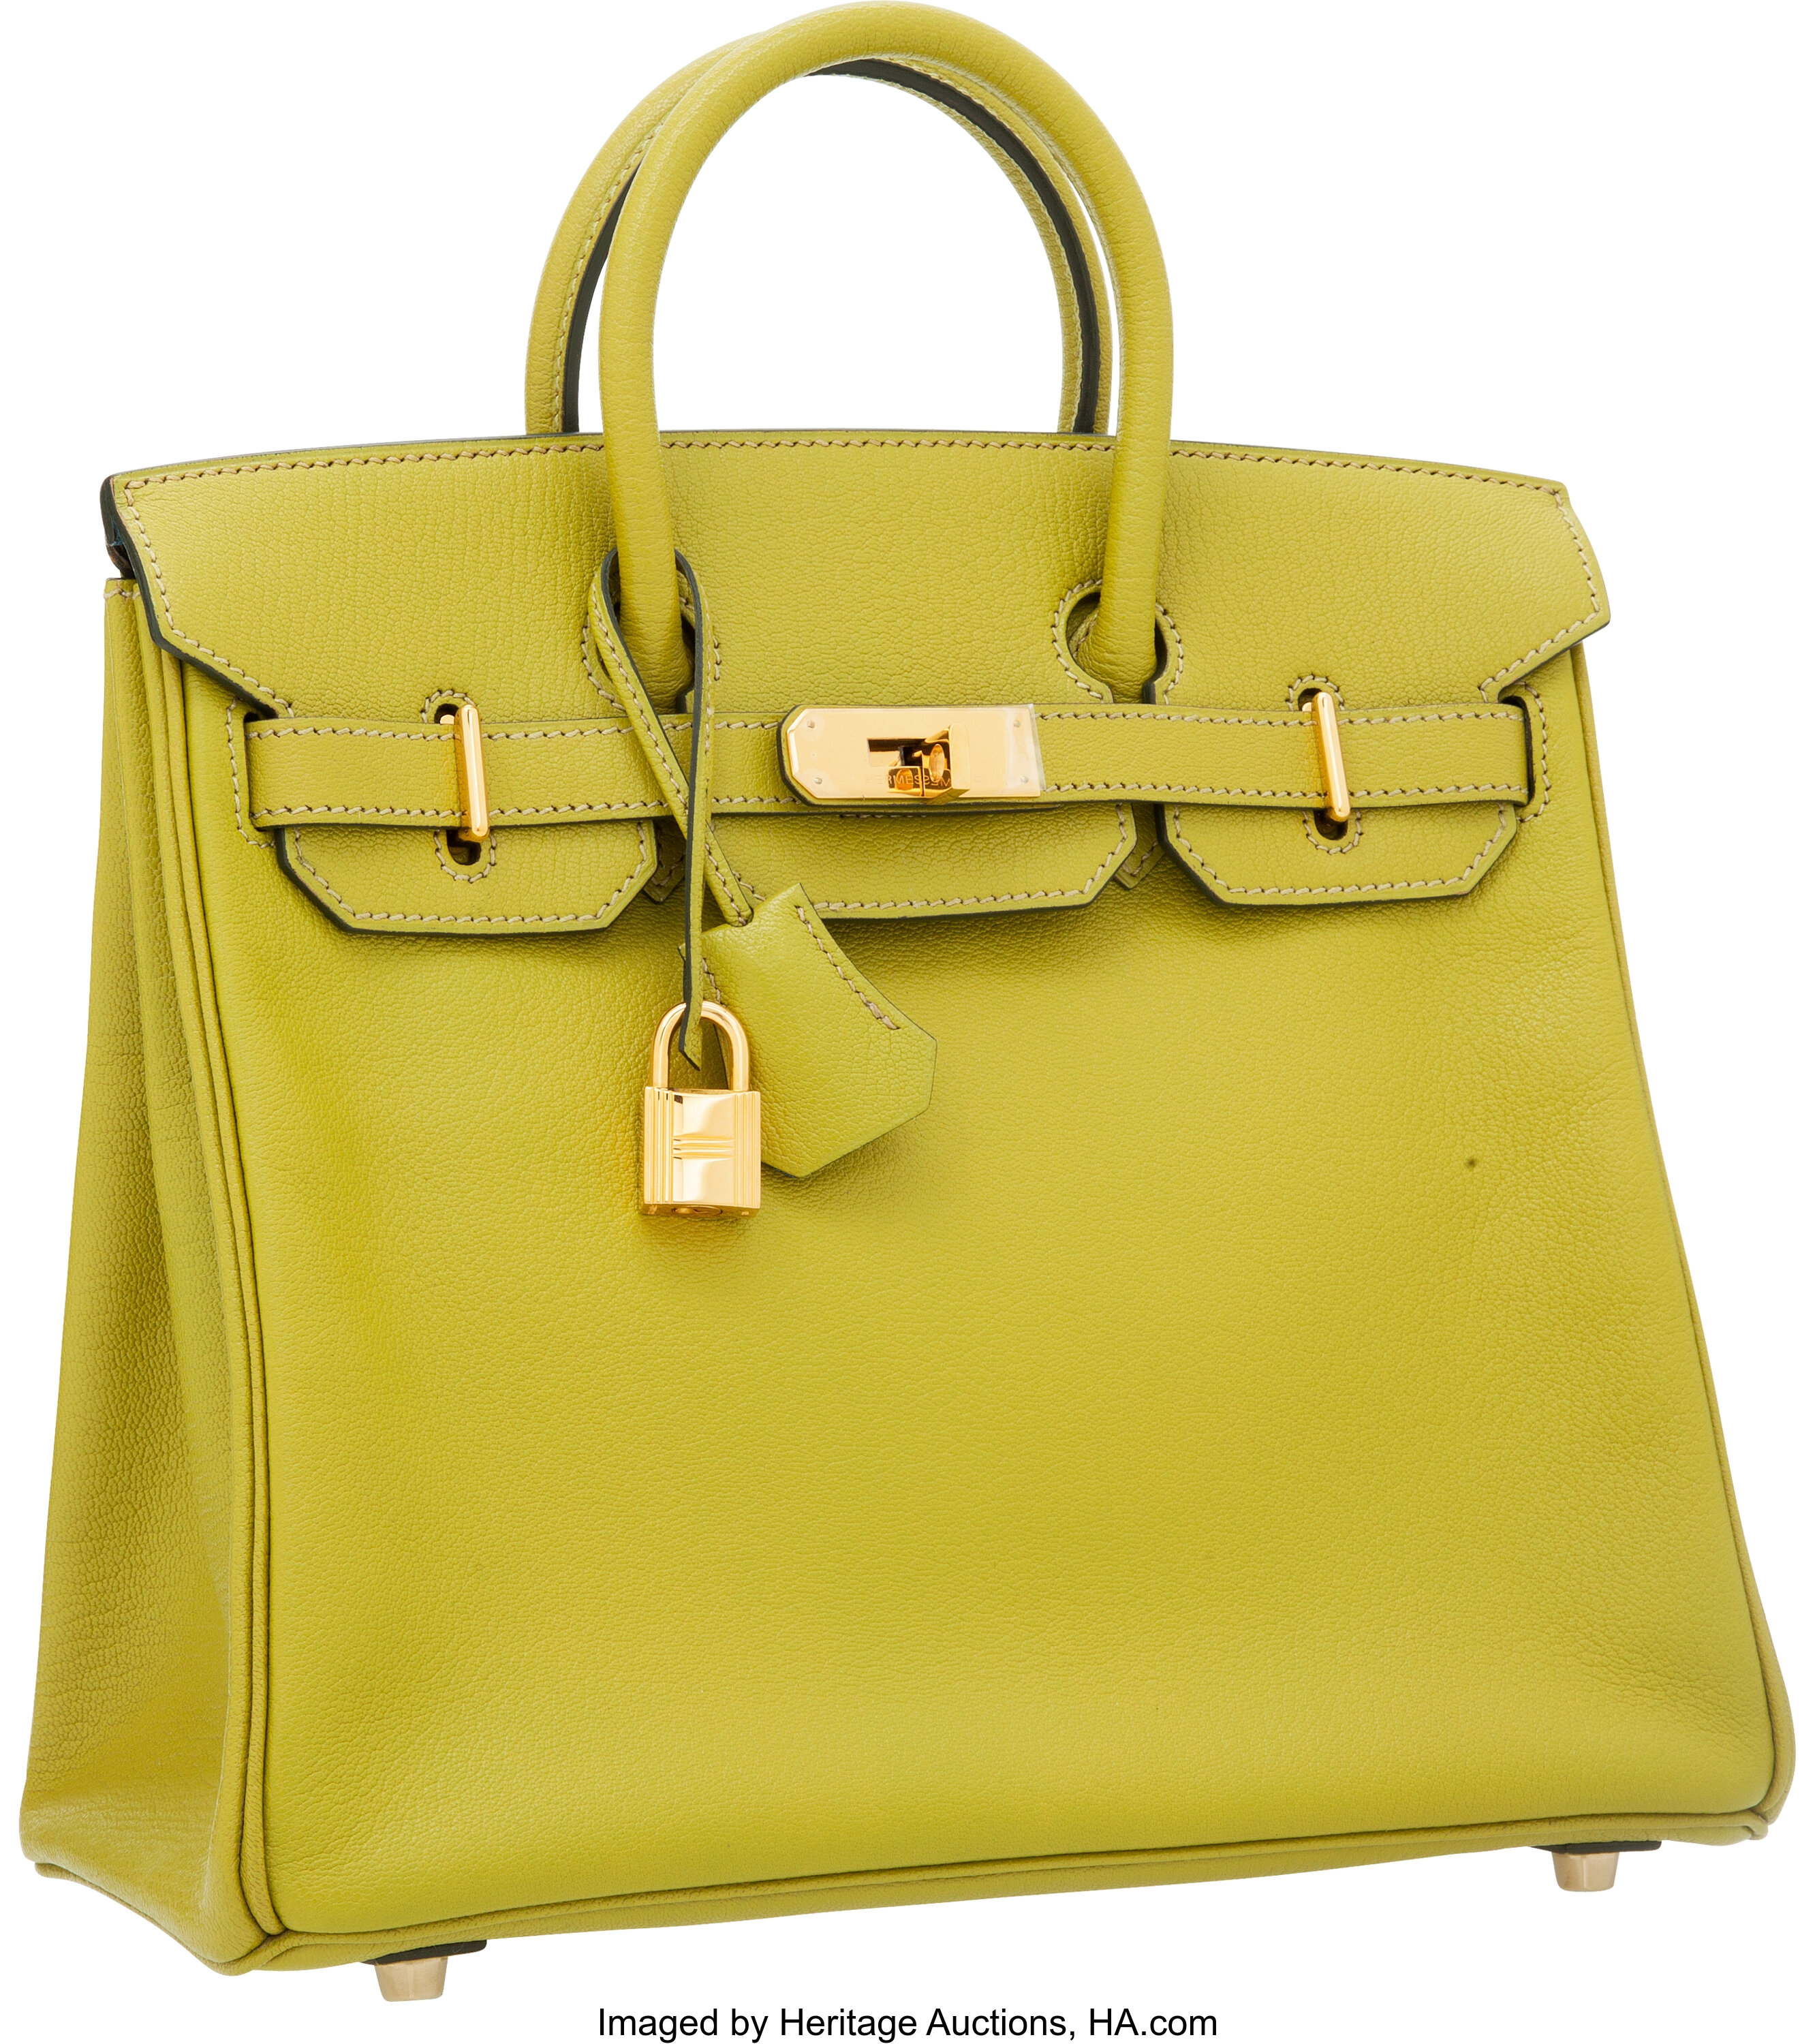 Hermes Birkin HAC anise green with gold hardware Chevre leather